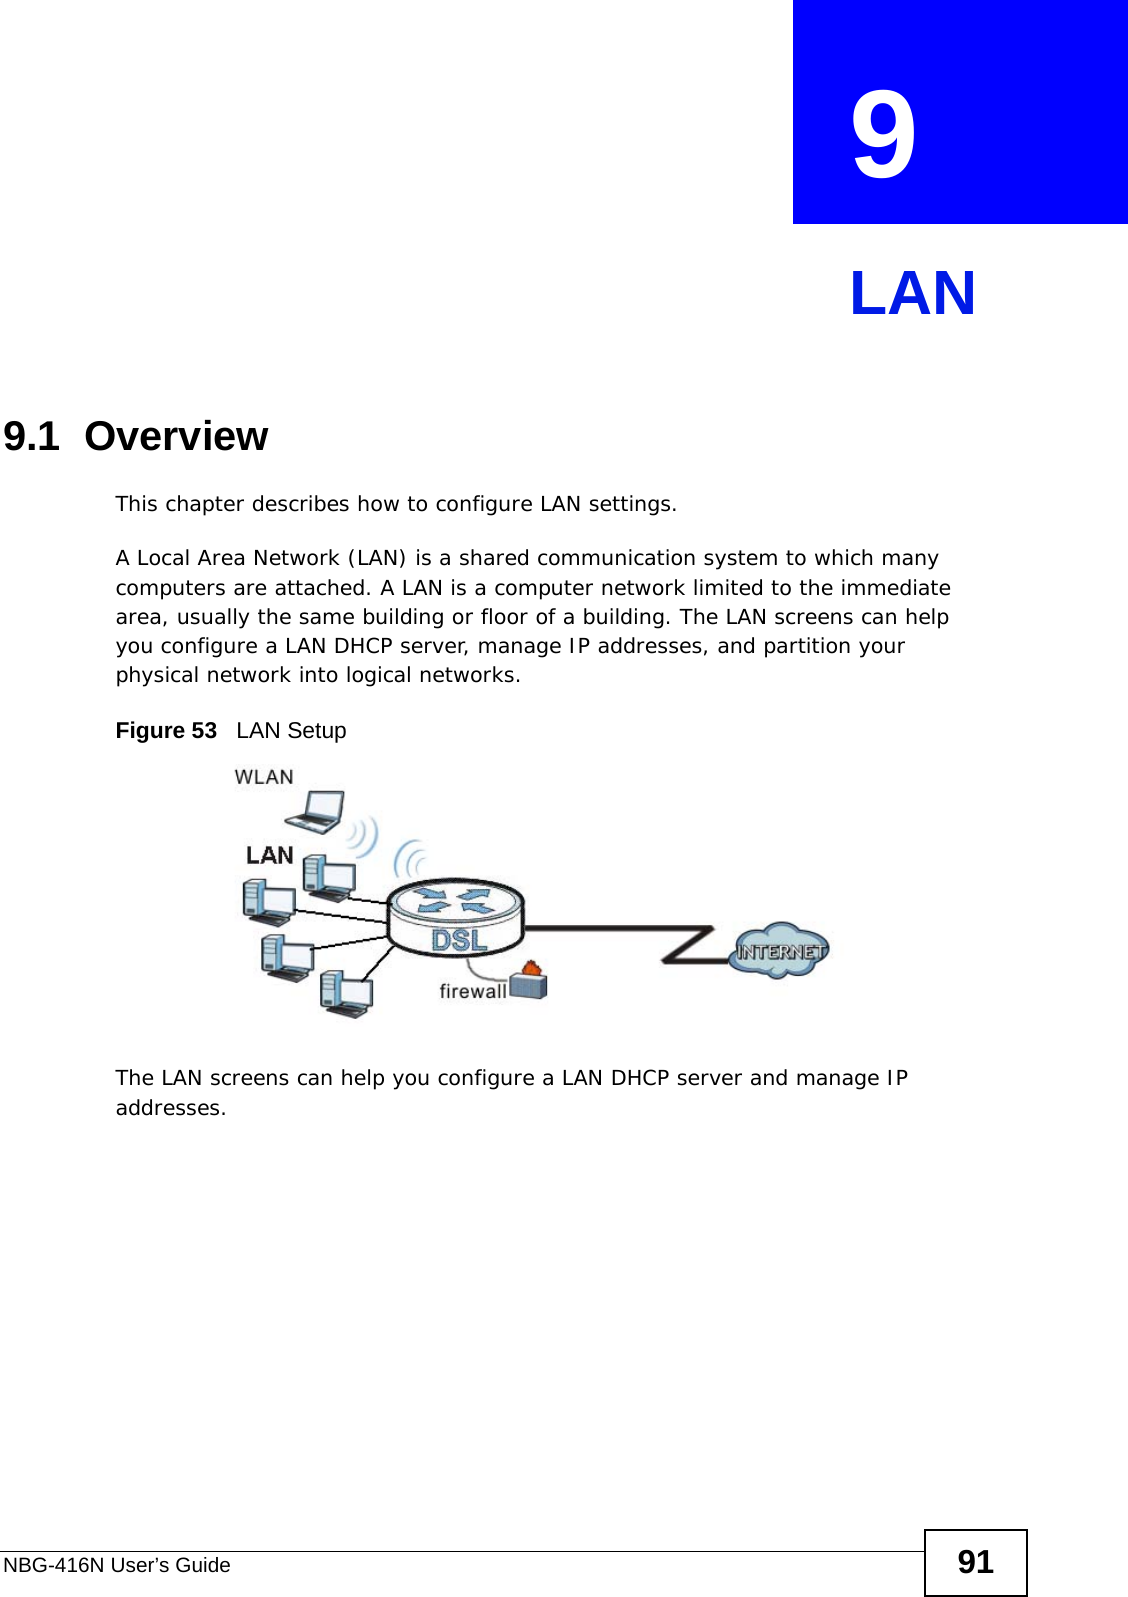 NBG-416N User’s Guide 91CHAPTER  9 LAN9.1  OverviewThis chapter describes how to configure LAN settings.A Local Area Network (LAN) is a shared communication system to which many computers are attached. A LAN is a computer network limited to the immediate area, usually the same building or floor of a building. The LAN screens can help you configure a LAN DHCP server, manage IP addresses, and partition your physical network into logical networks.Figure 53   LAN SetupThe LAN screens can help you configure a LAN DHCP server and manage IP addresses.